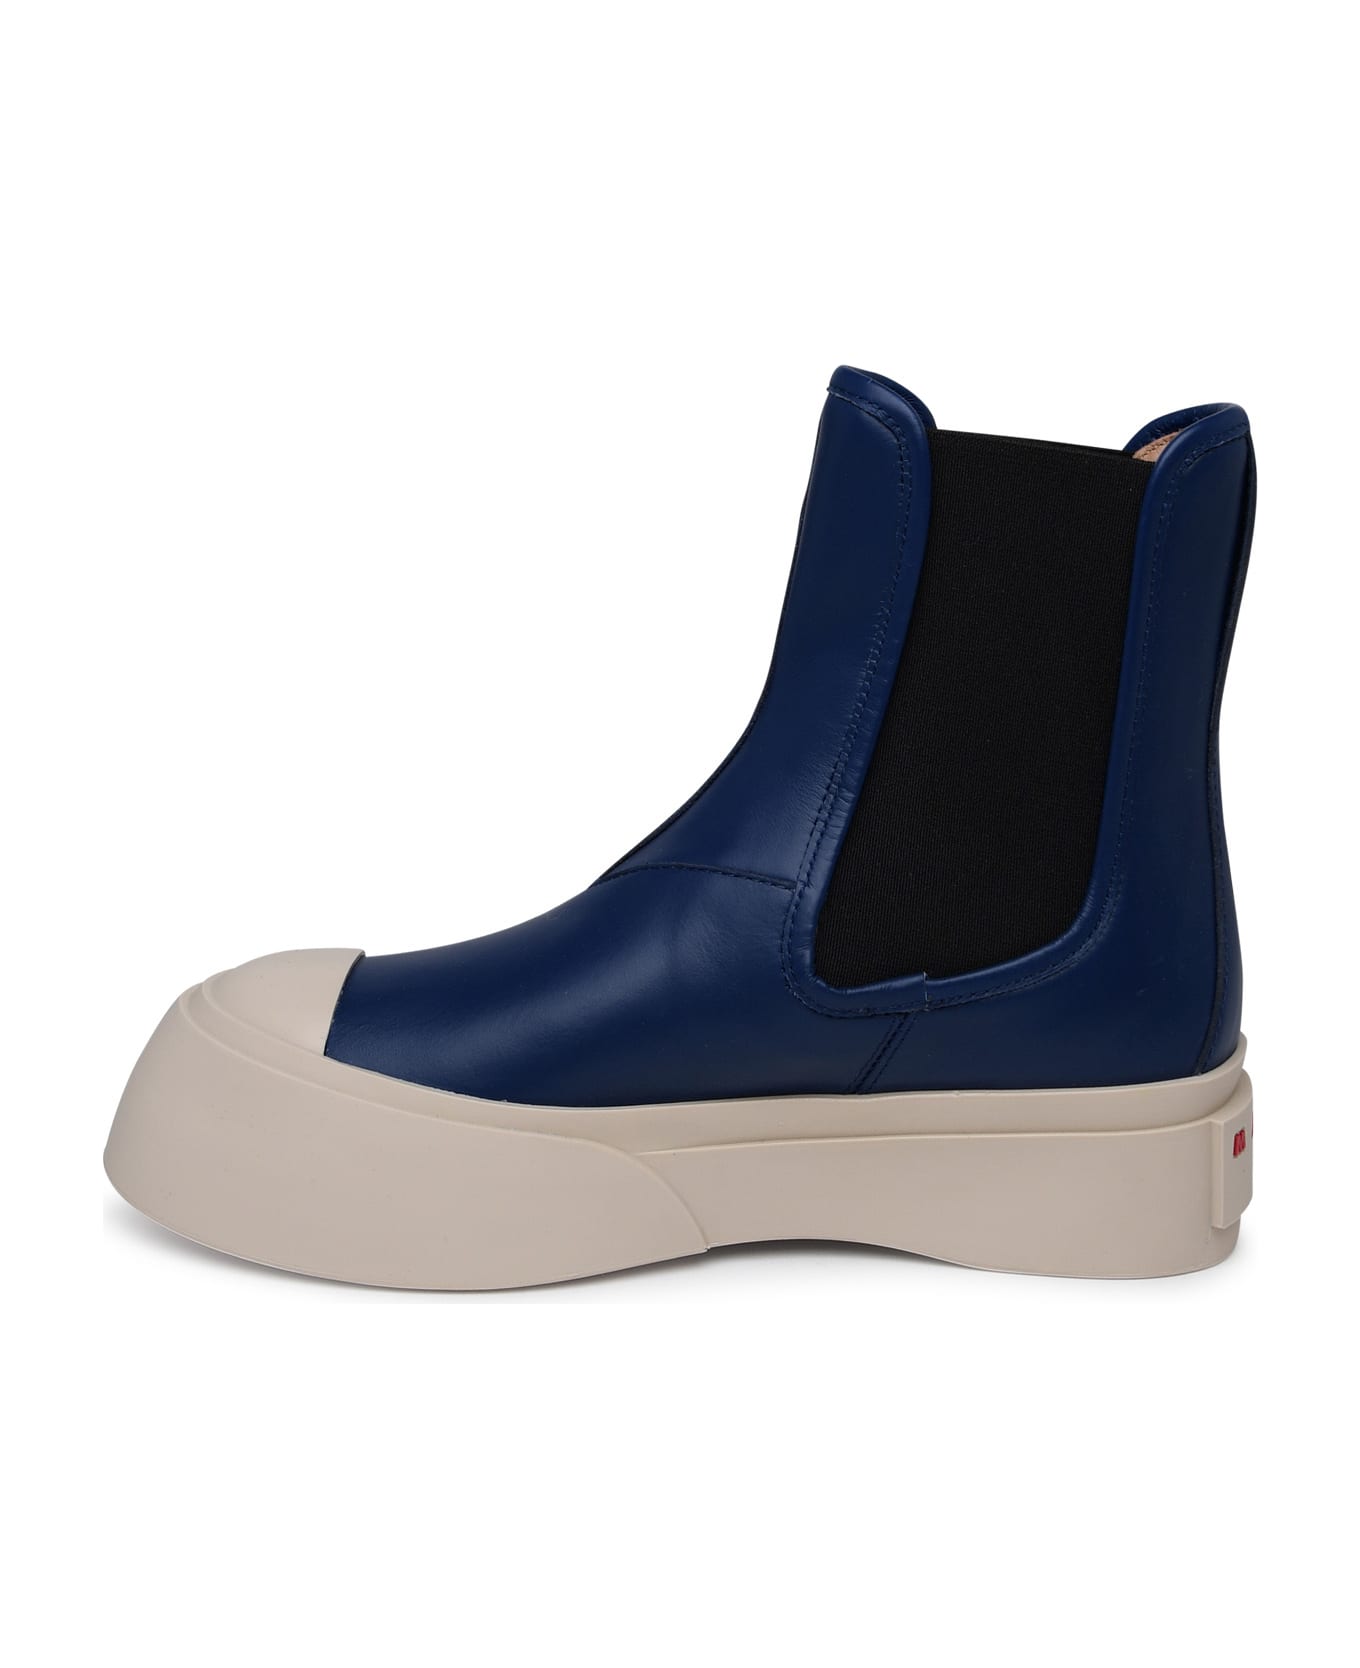 Marni 'pablo' Blue Nappa Leather Ankle Boots - Blue